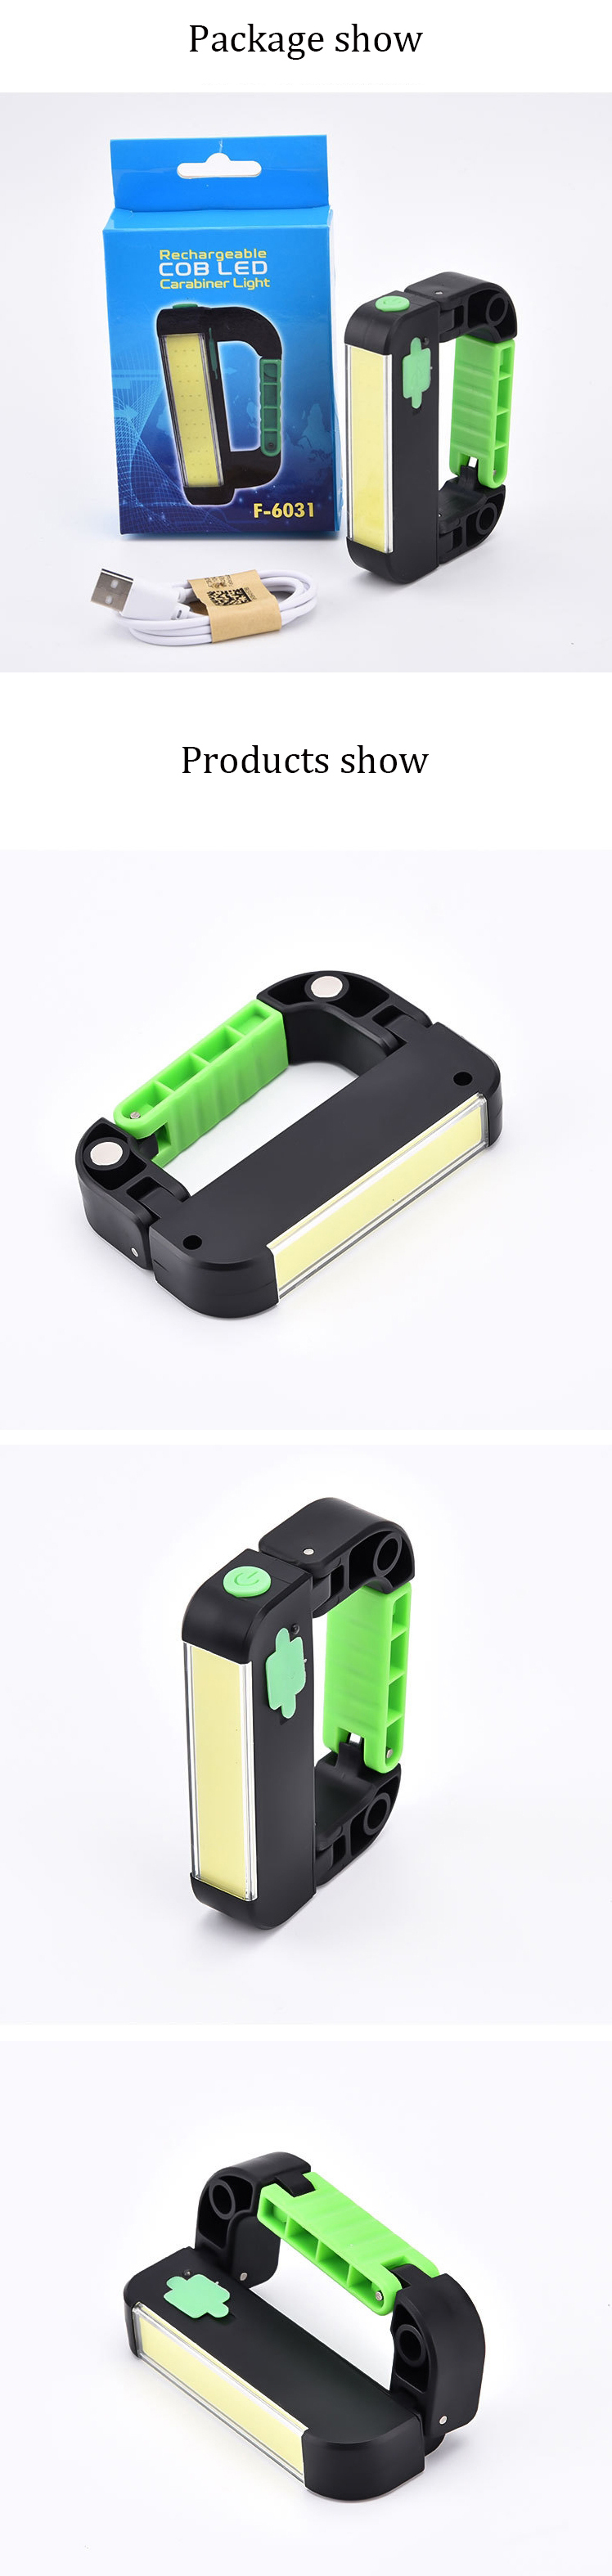 F-6031-COBLED-3Modes-2200mAh-90deg-Rotatable-USB-Rechargeable-Work-Light-Outdoor-Multifunctional-Eme-1572300